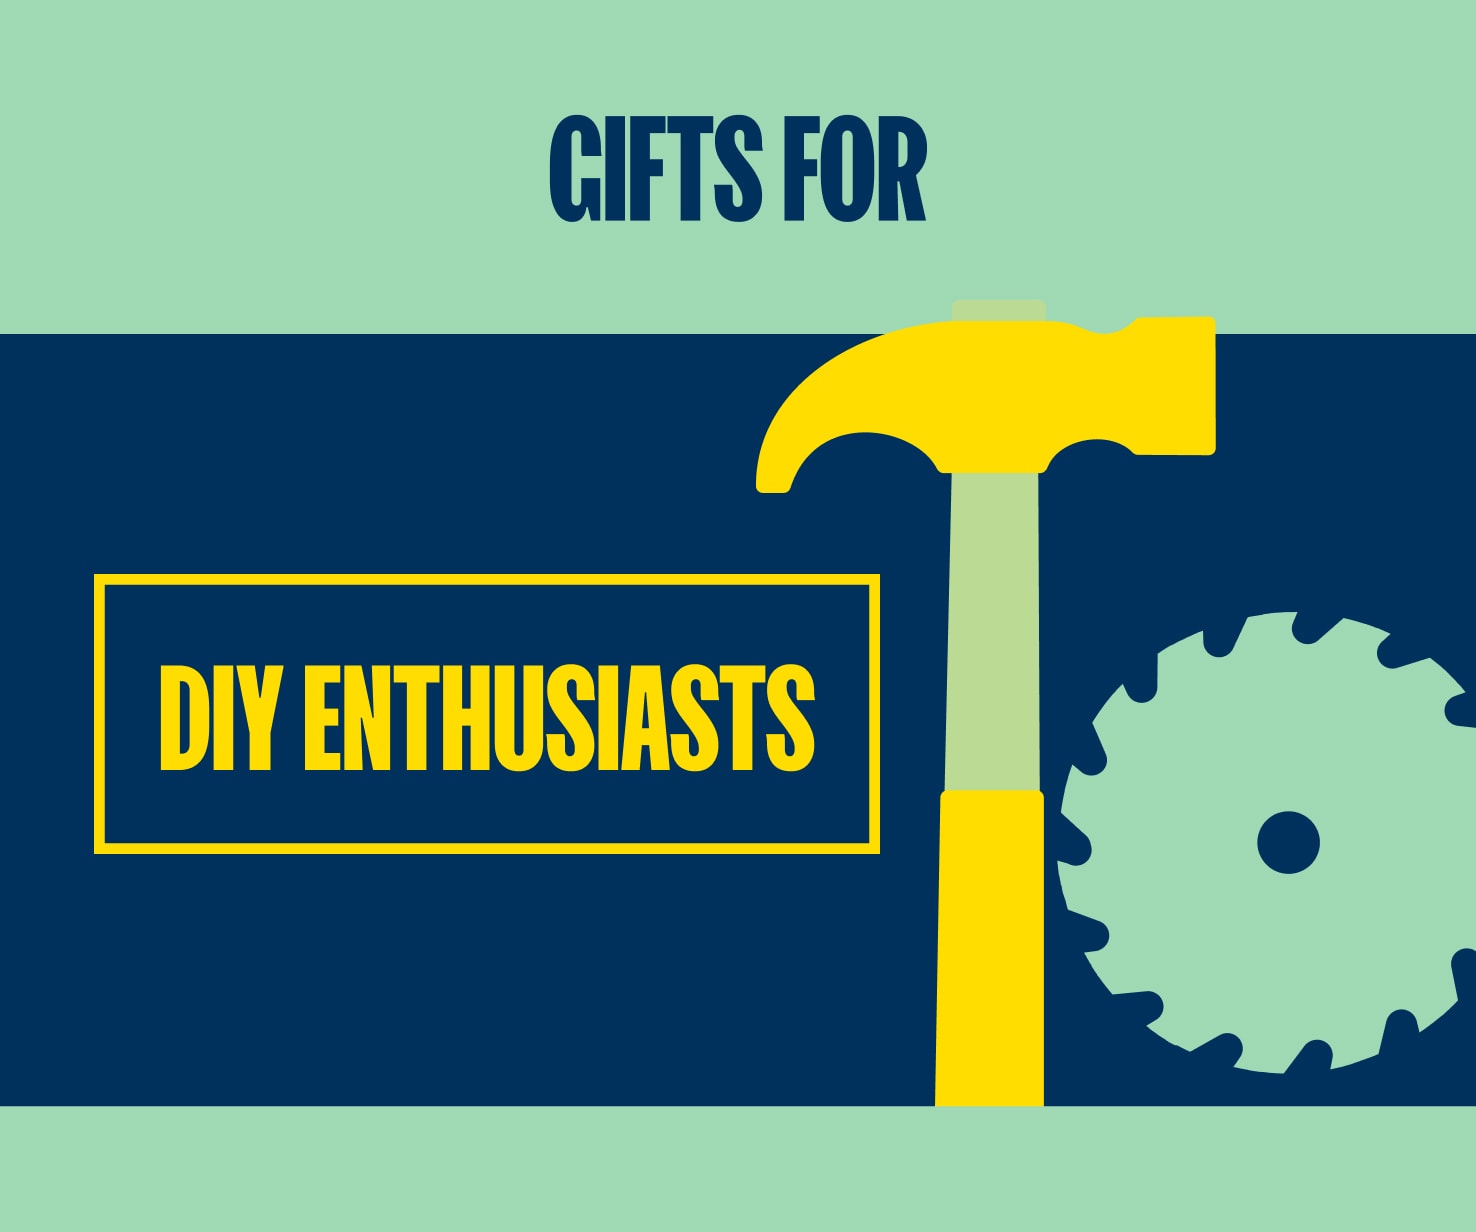 Gift ideas for DIY enthusiasts 